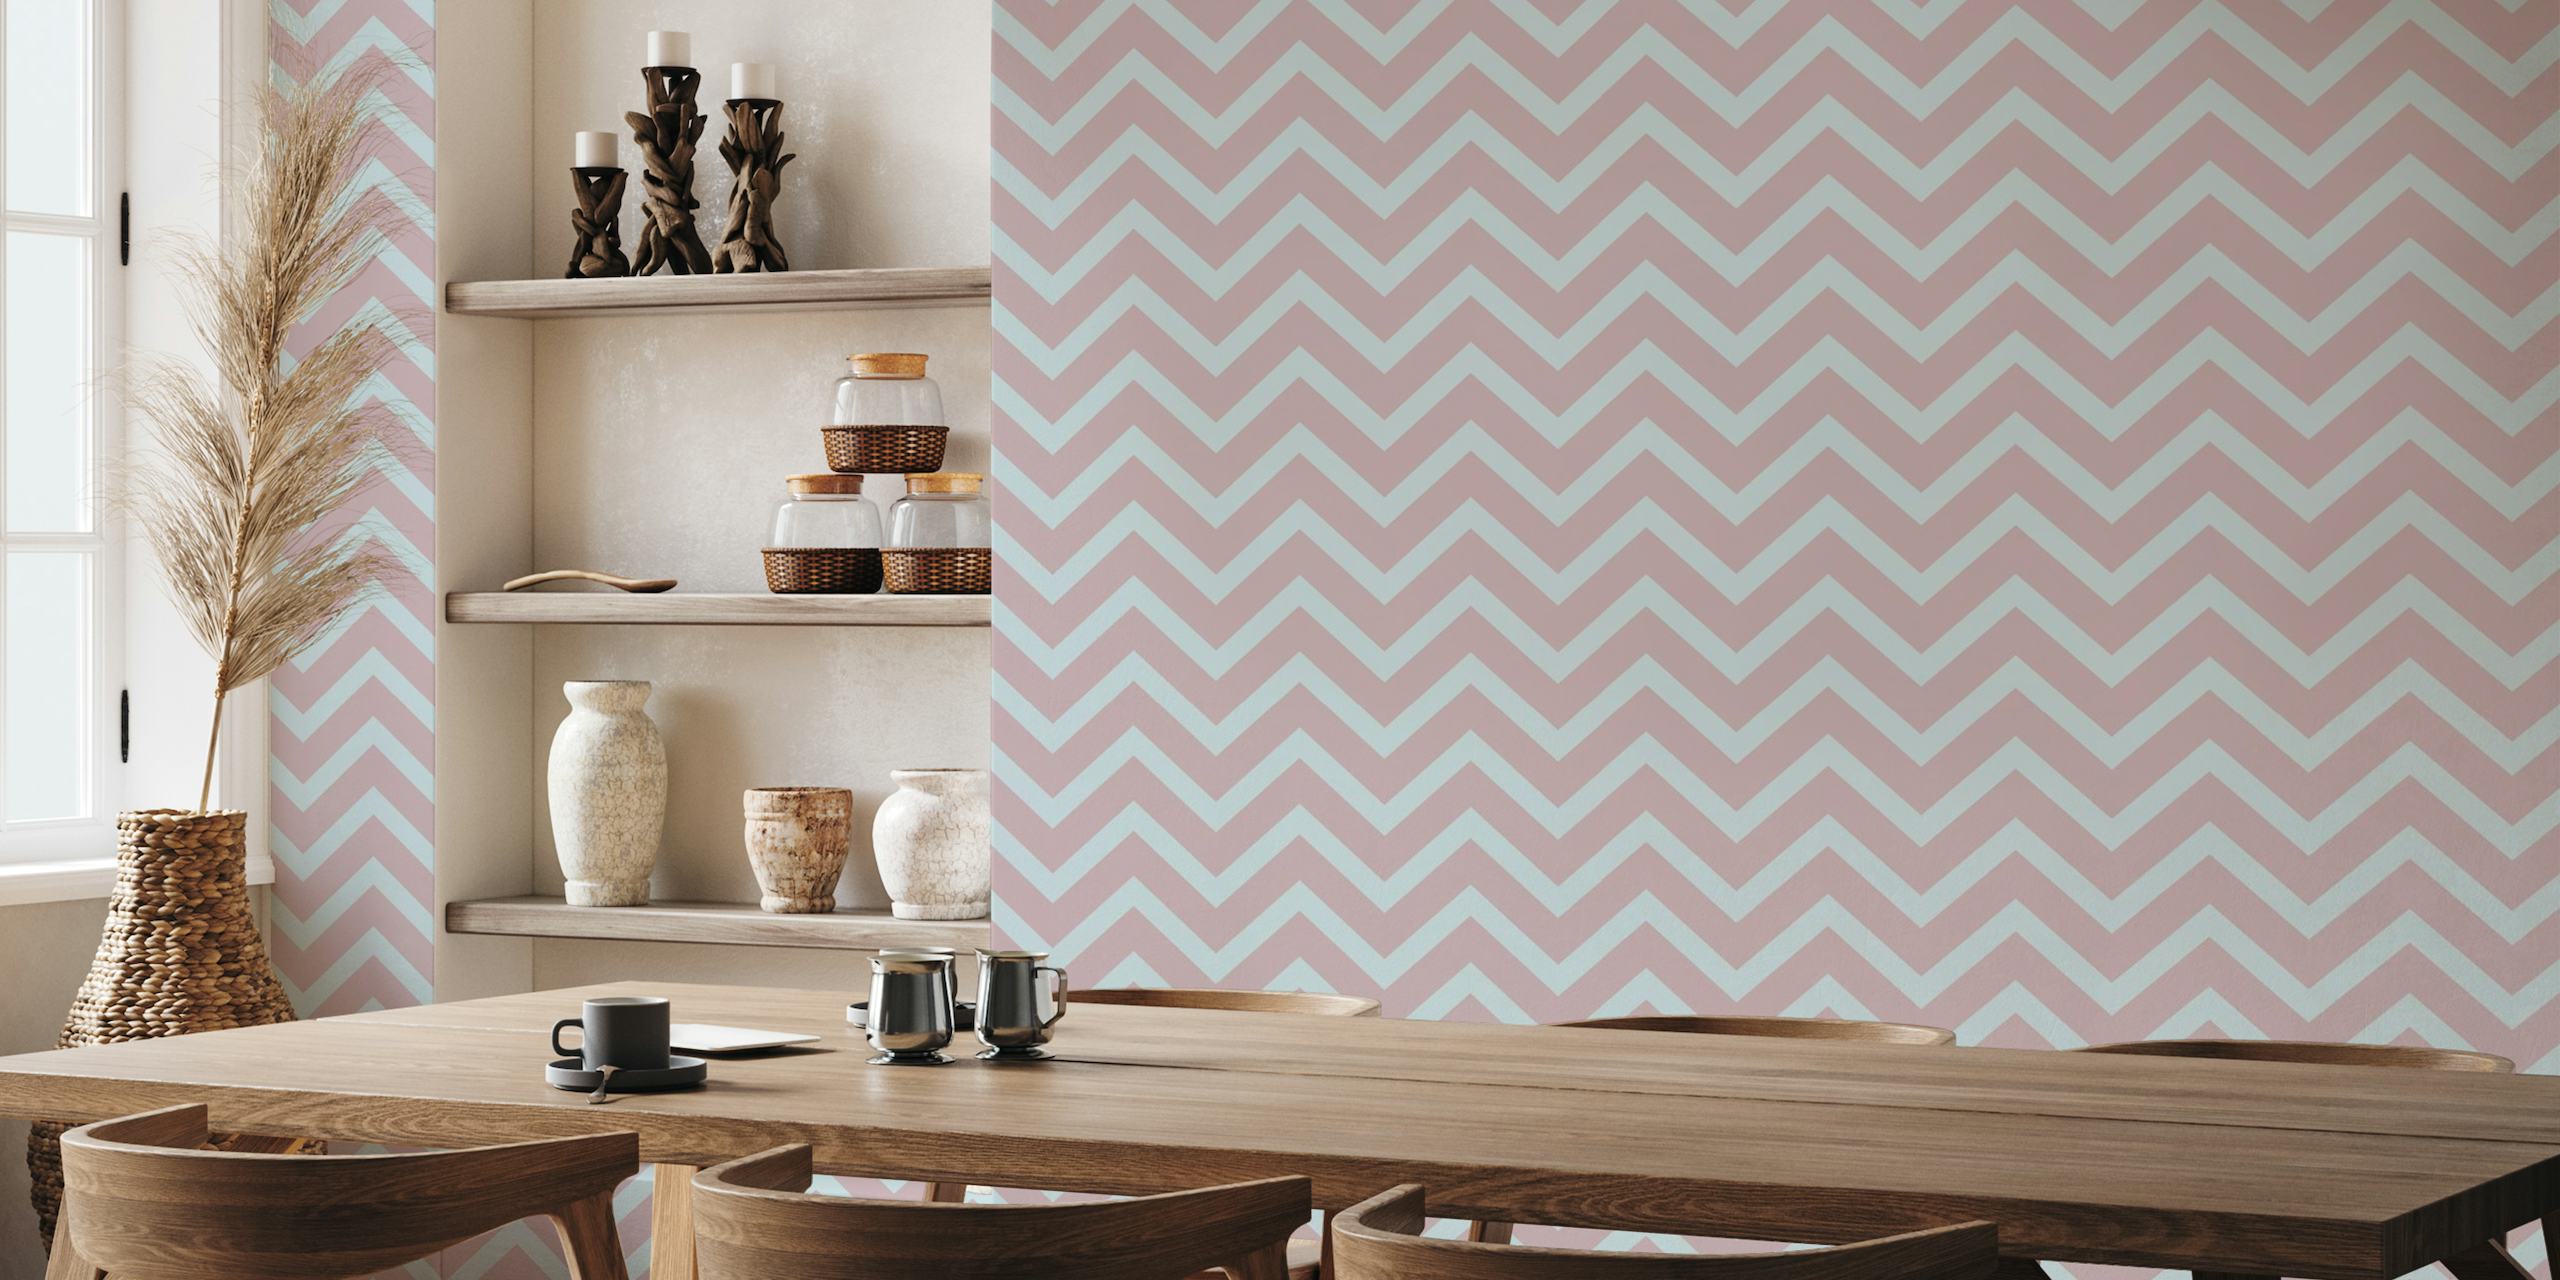 Soft pink and grey zigzag pattern wall mural